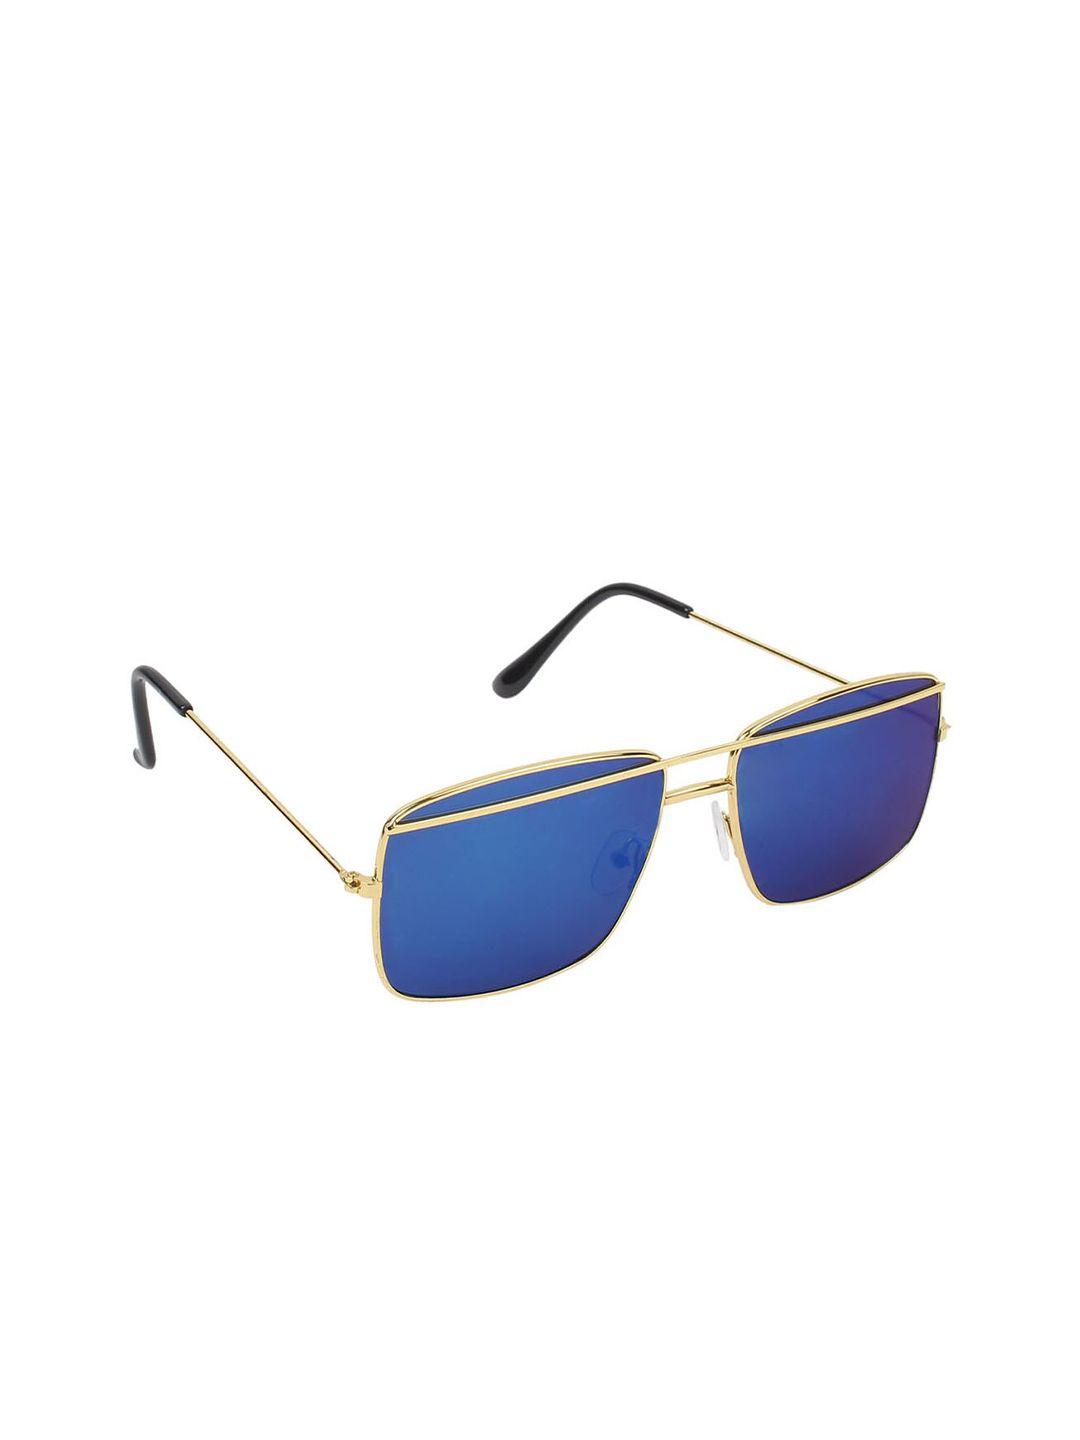 swiss design unisex blue lens & gold-toned browline sunglasses with uv protected lens